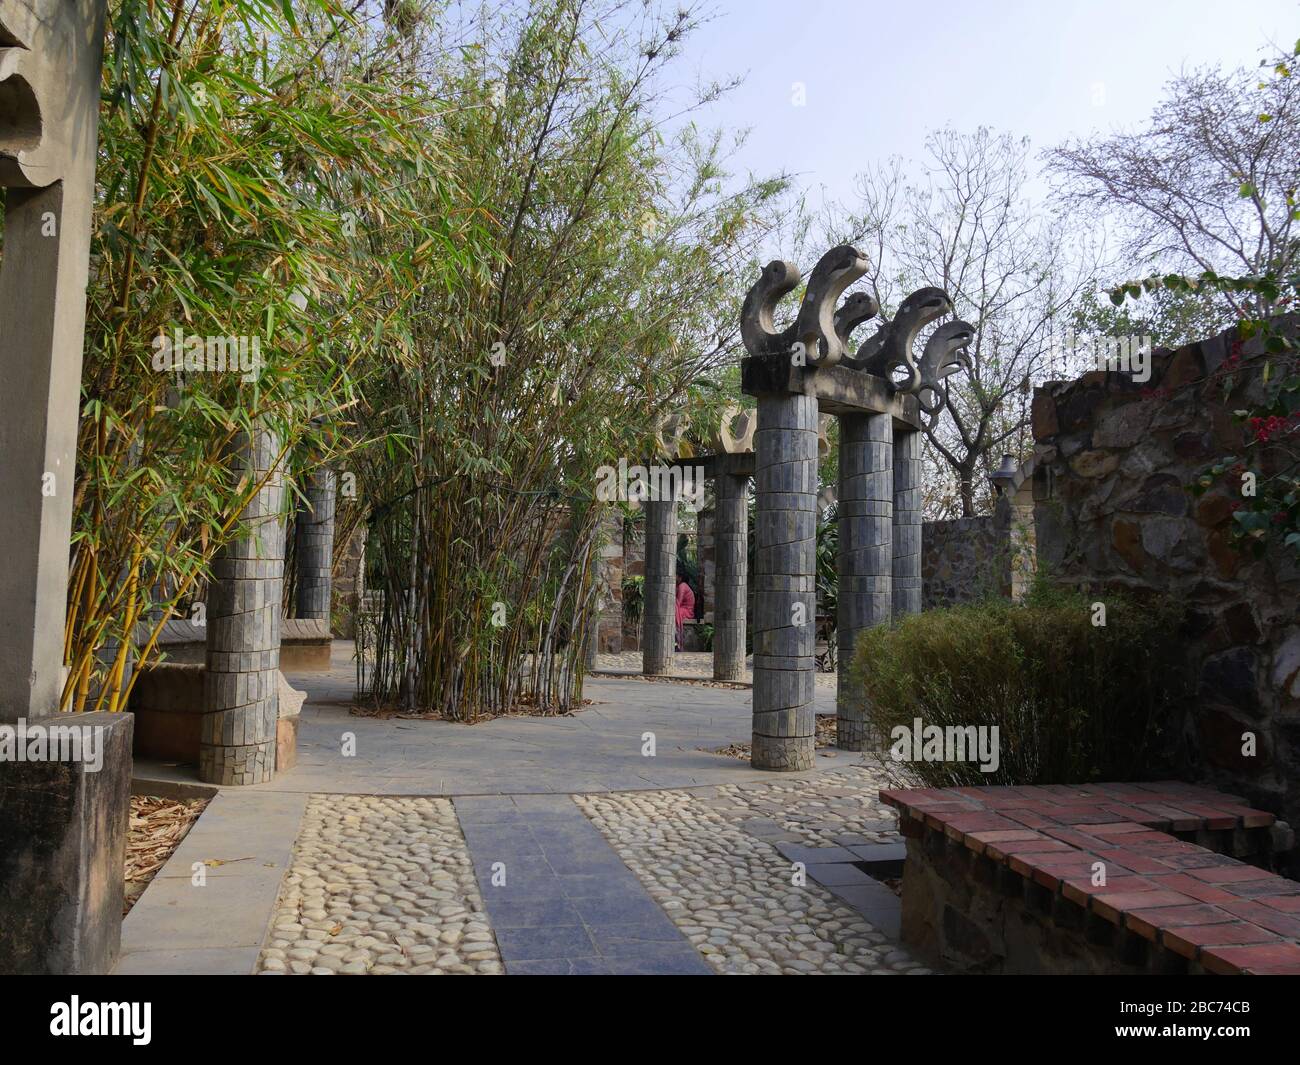 New Delhi, India- March 2018: Garden of the Five Senses is one of the top attractions in New Delhi. Stock Photo